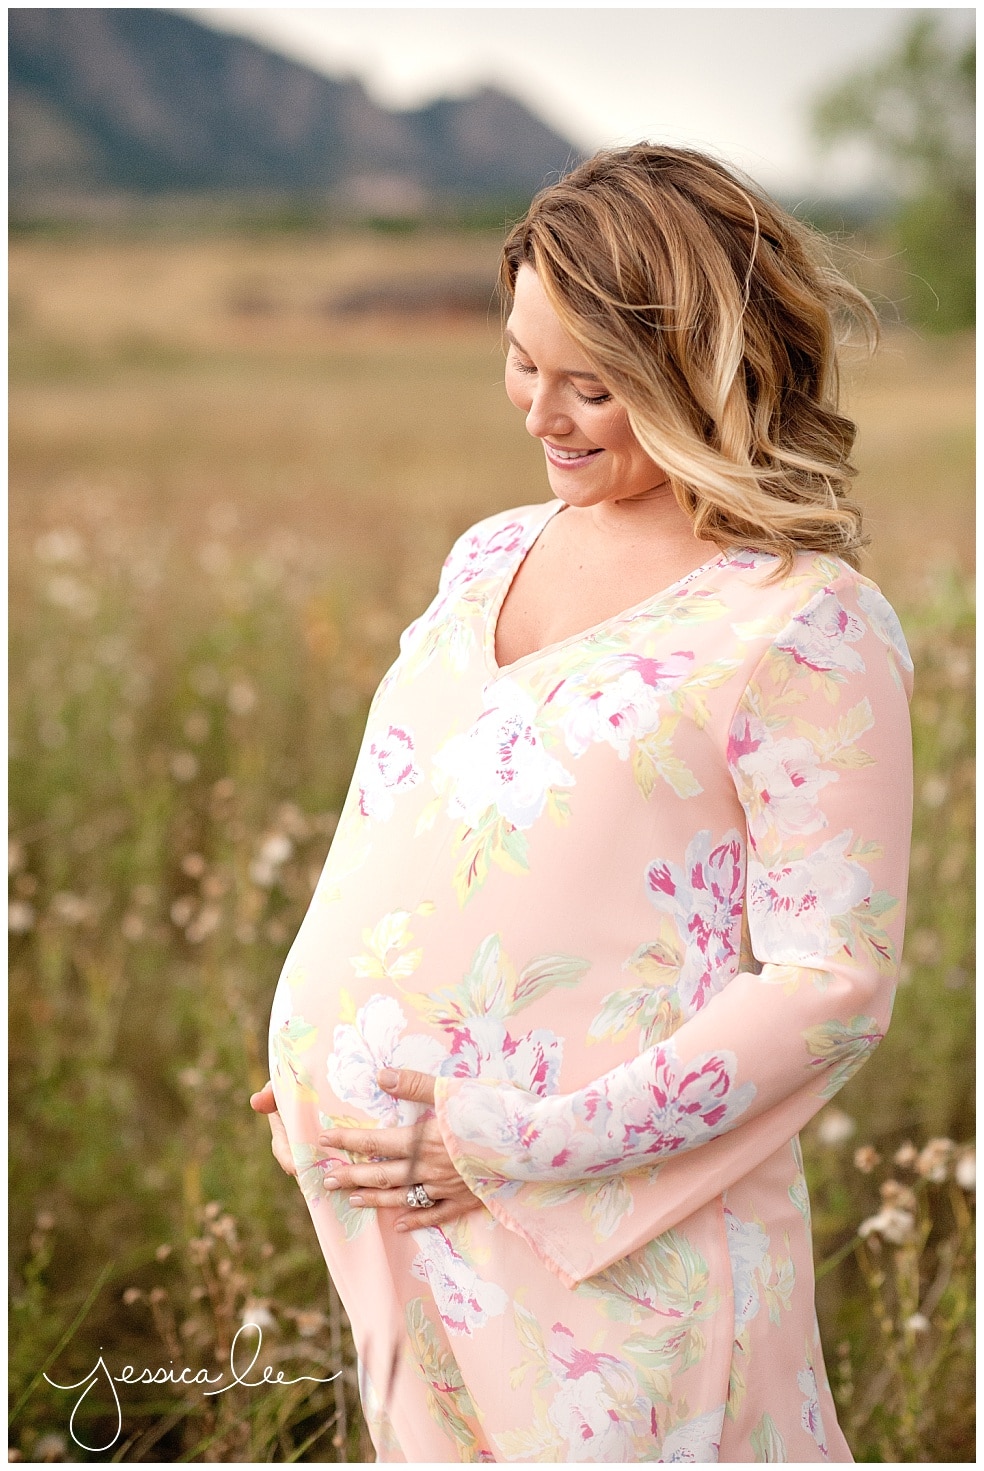 newborn baby photography erie, smiling maternity photo in boulder colorado